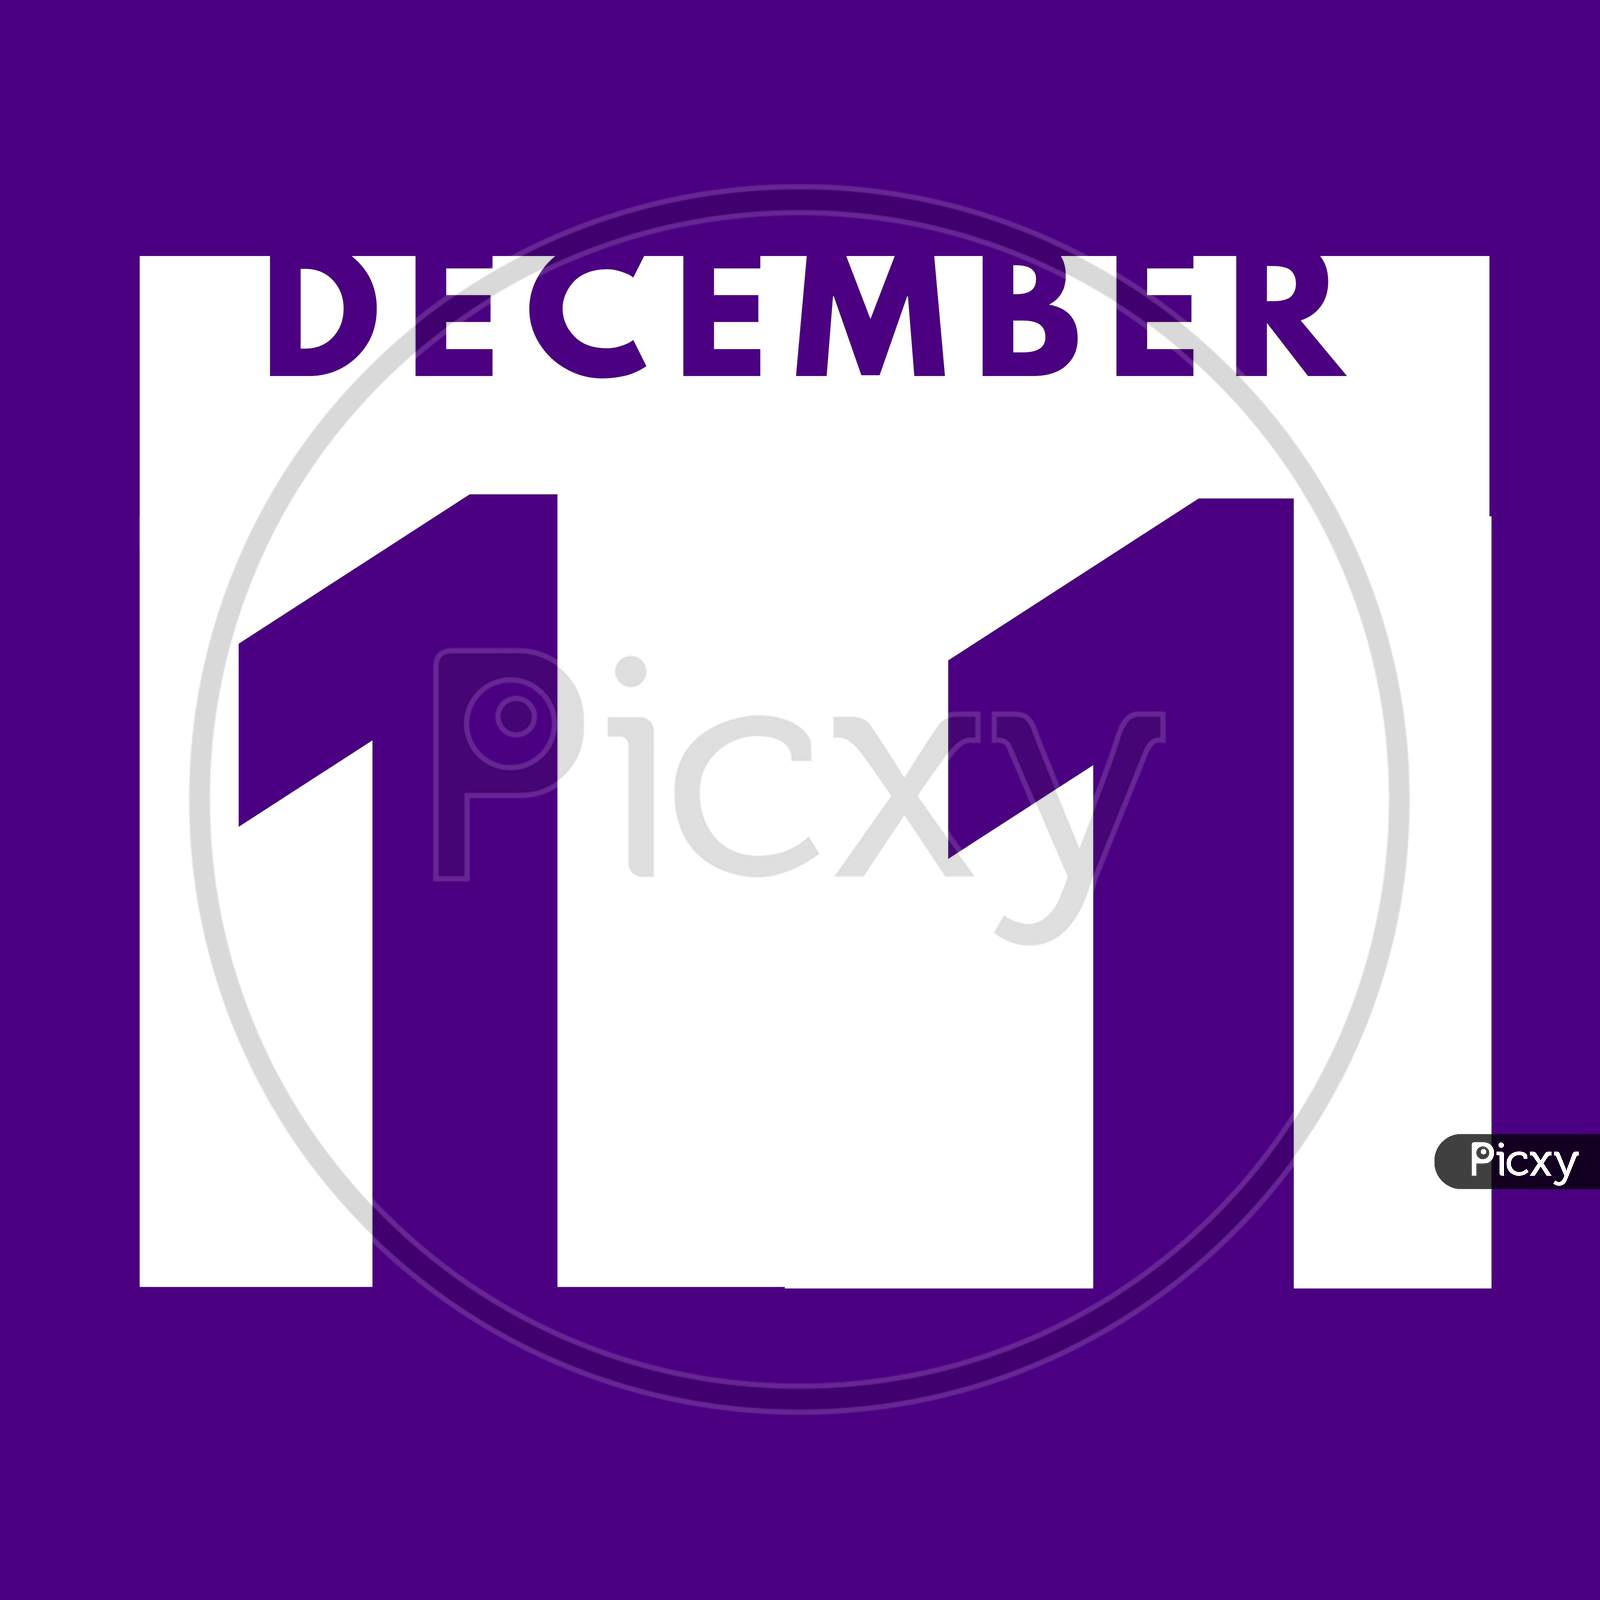 December 11 . Flat Modern Daily Calendar Icon .Date ,Day, Month .Calendar For The Month Of December